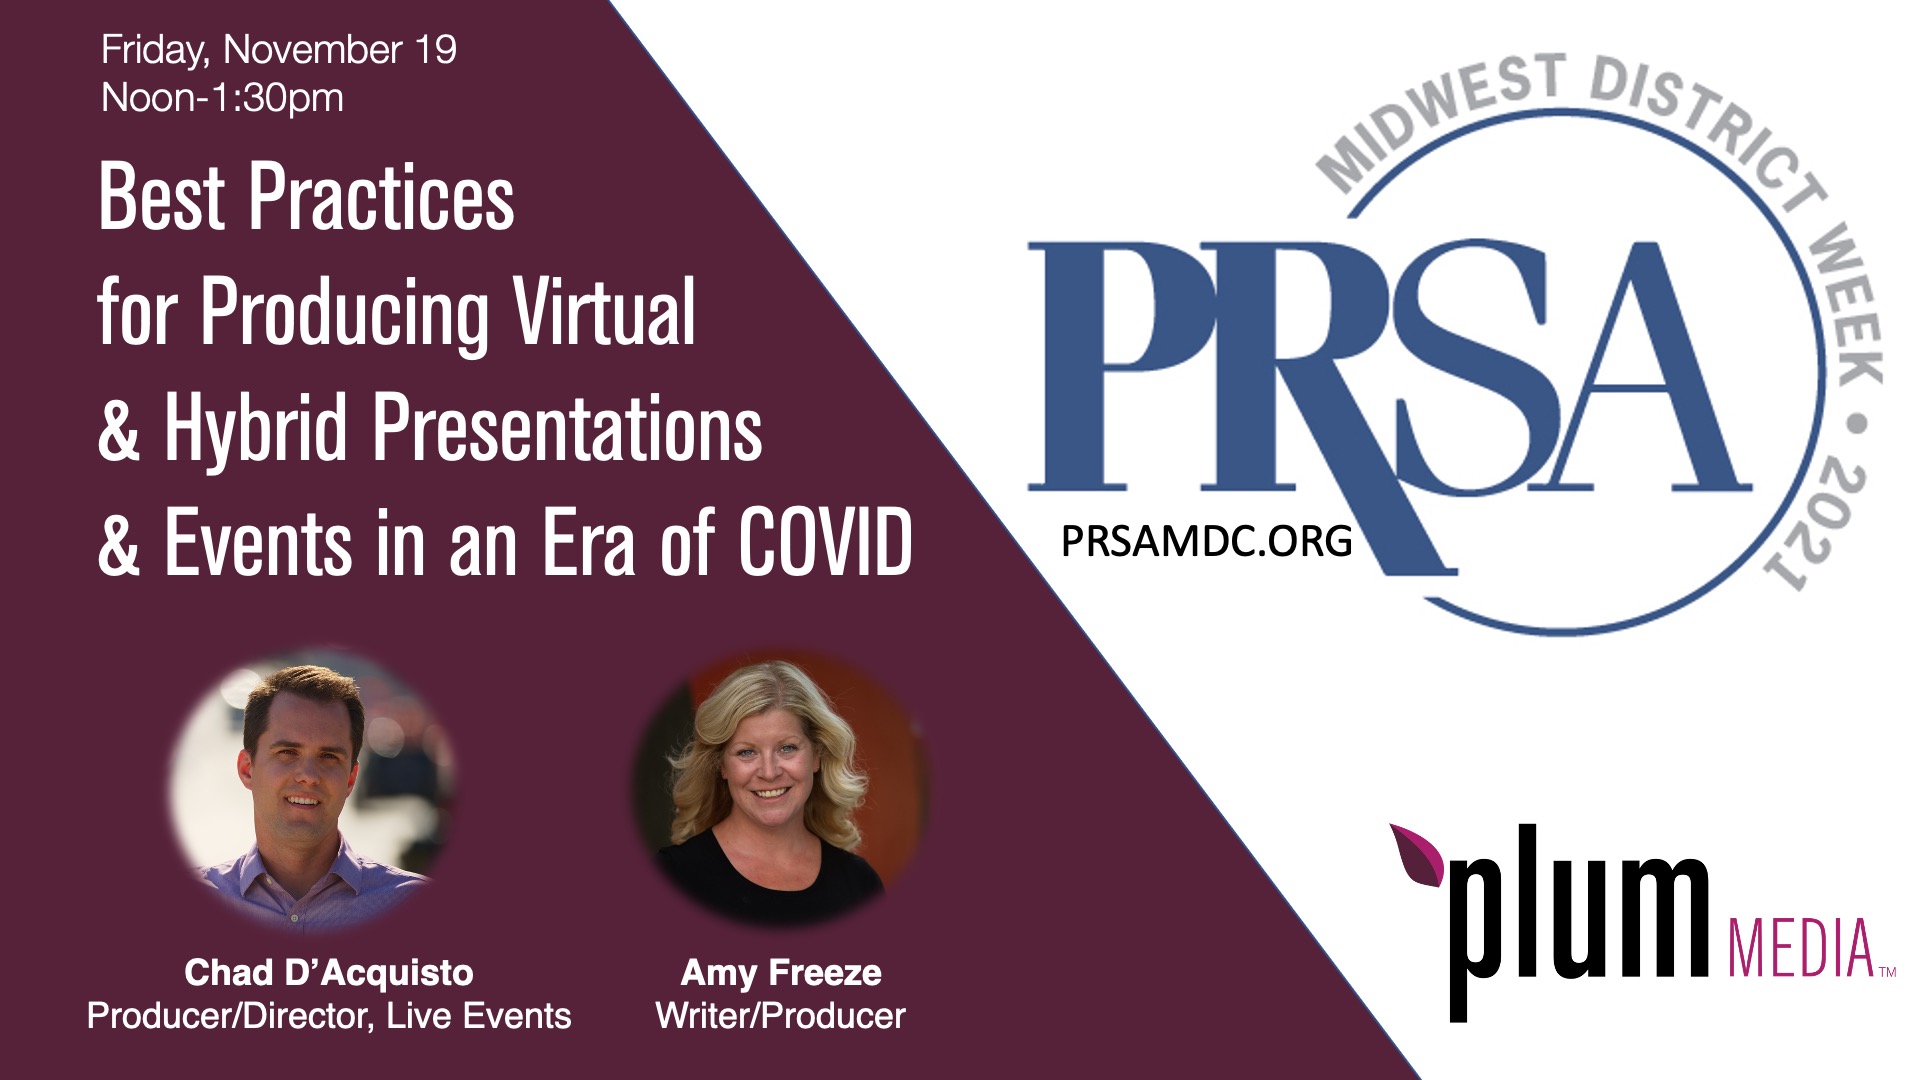  Best Practices for Producing Virtual & Hybrid Presentations & Events in an Era of COVID